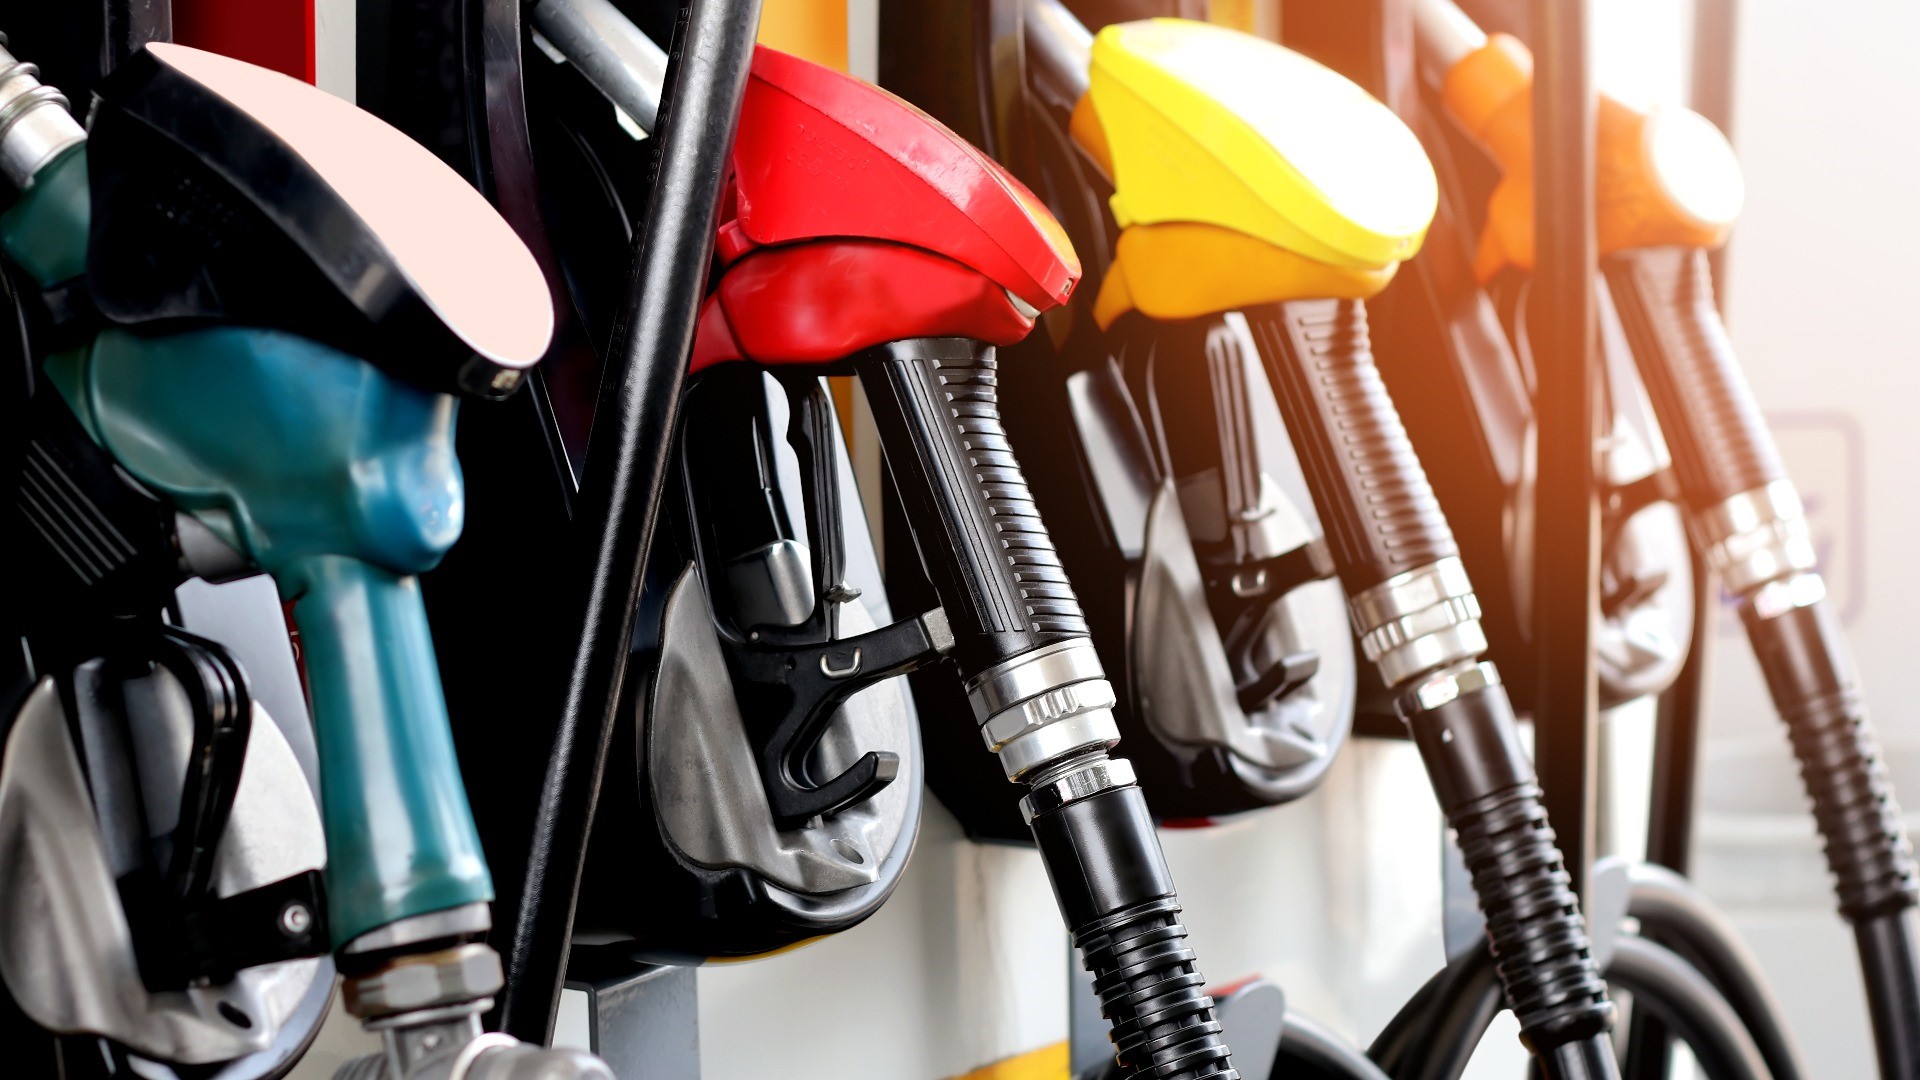 As we're getting out of the summer travel season, gas prices could fall even more.